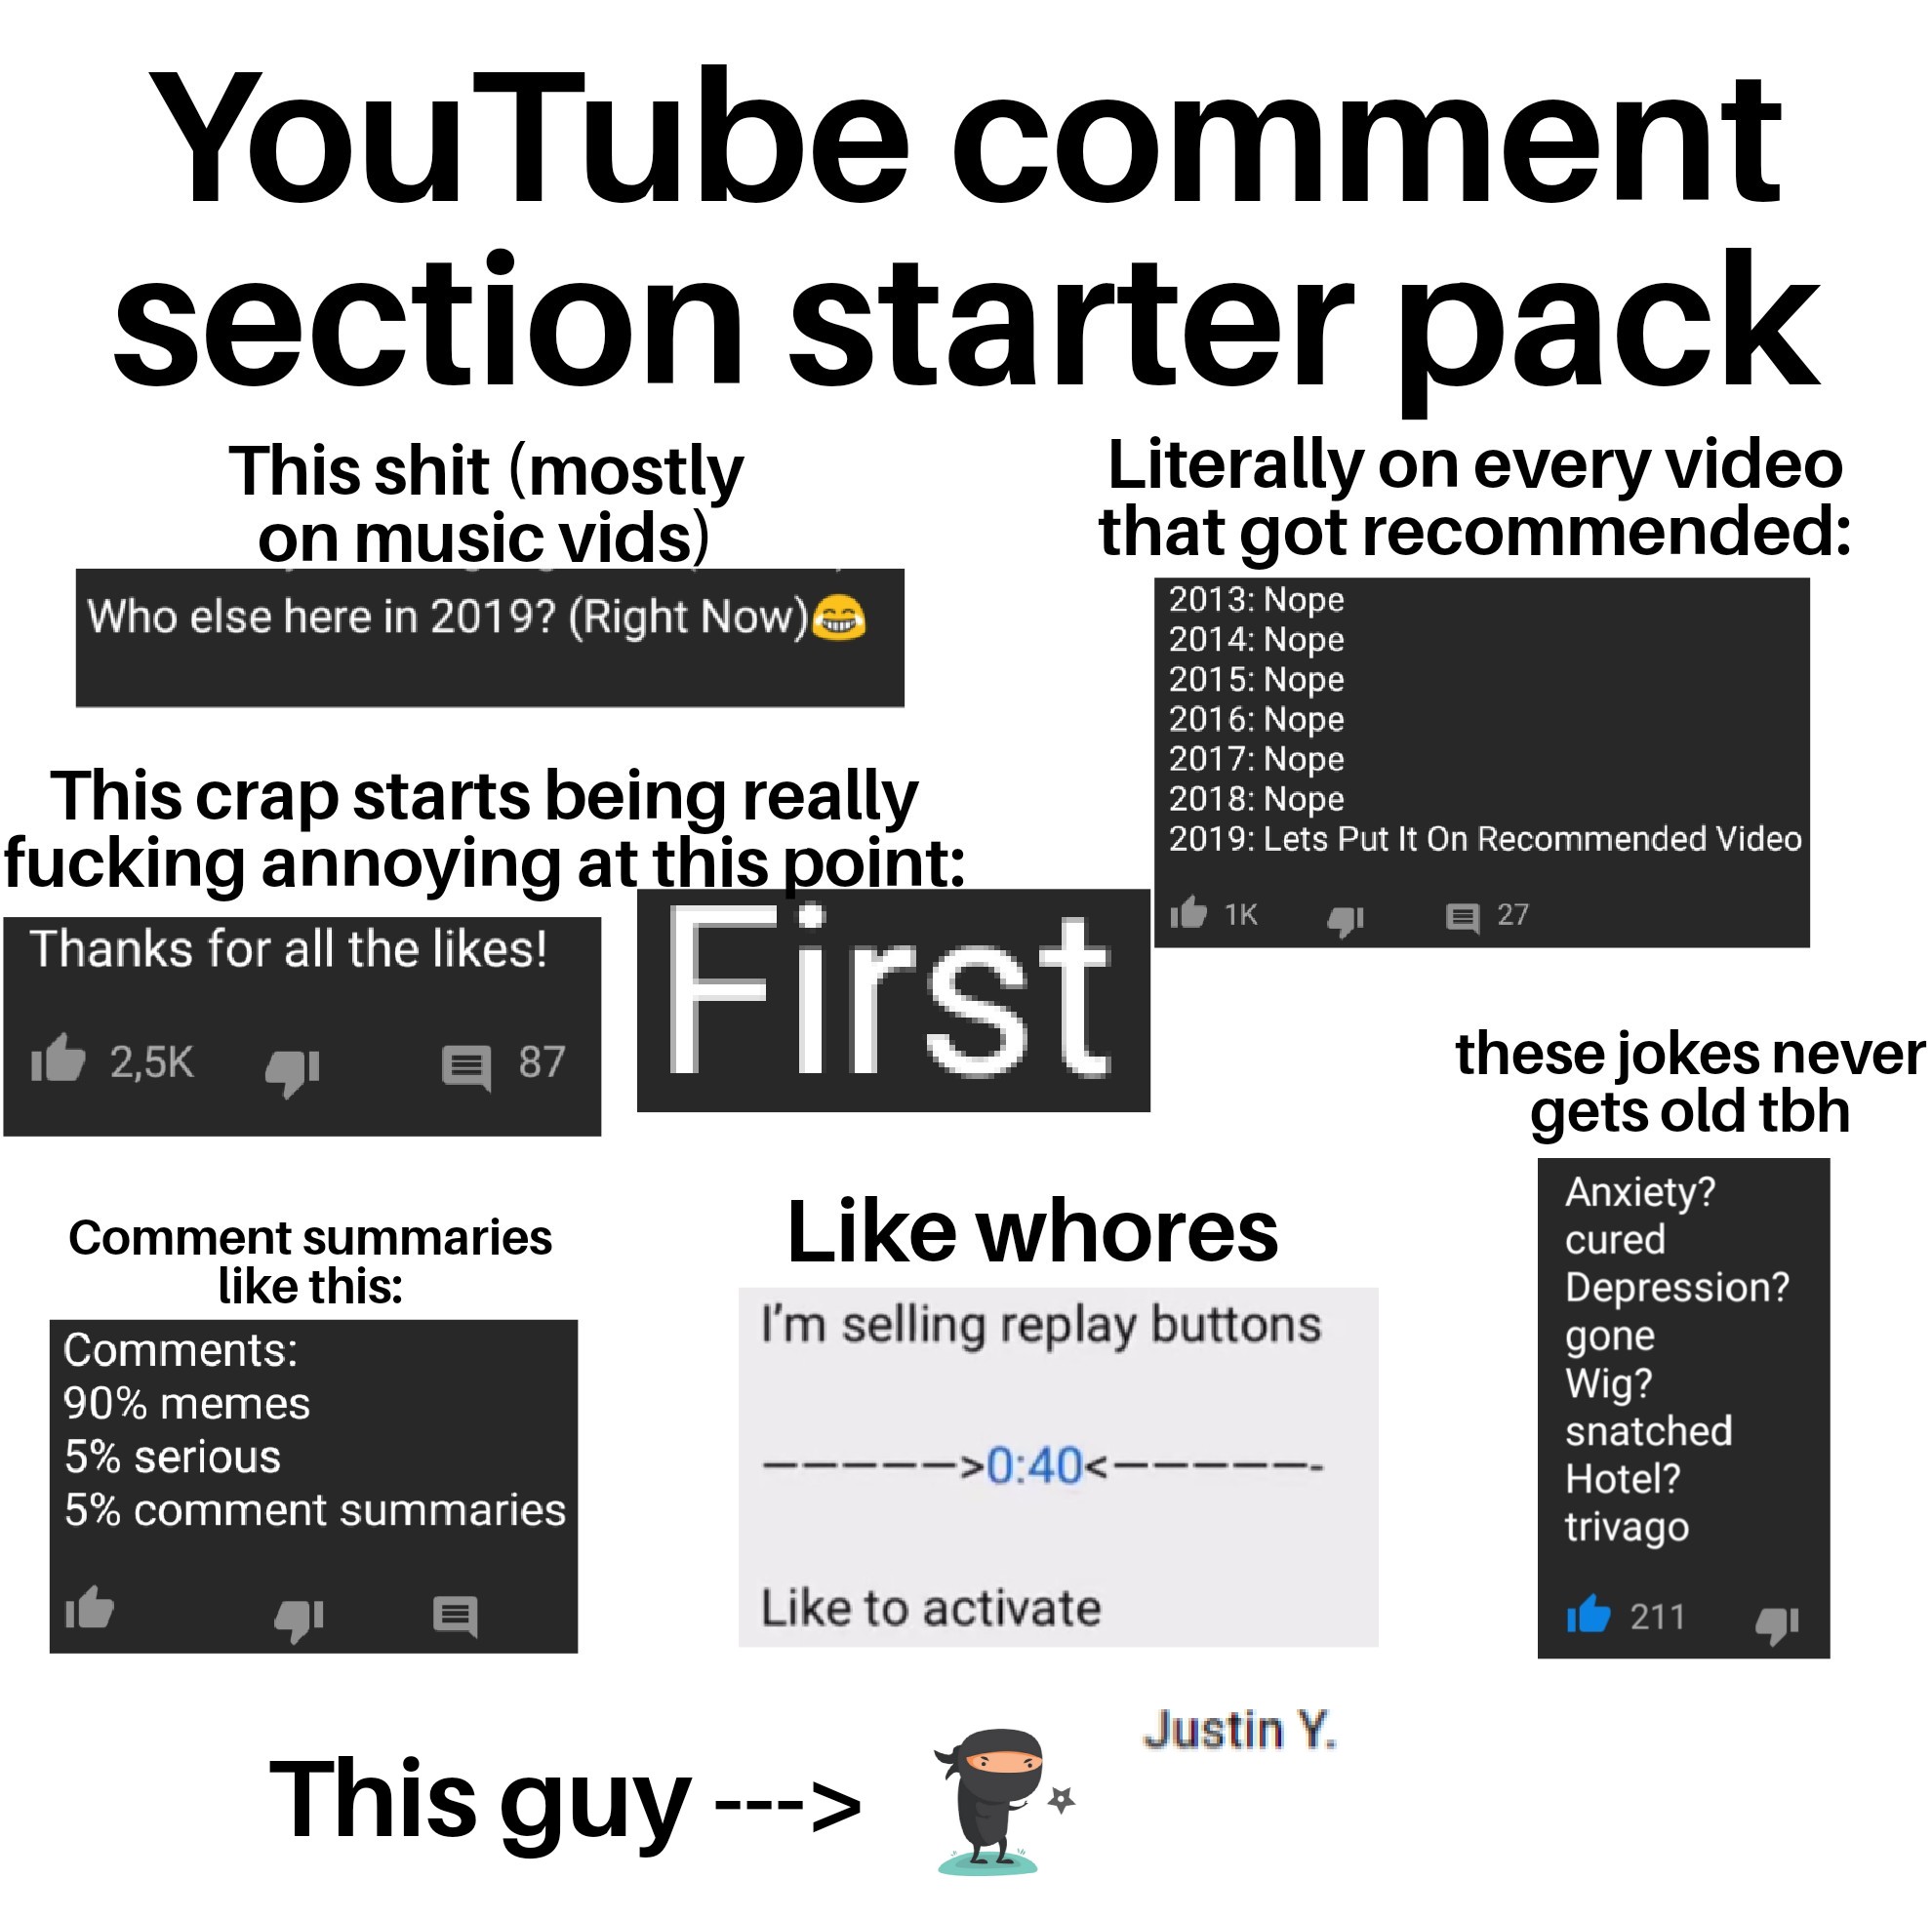 Starter Pack Meme - YouTube comment section starter pack This shit mostly on music vids Who else here in 2019? Right Now Literally on every video that got recommended 2013 Nope This crap starts being really fucking annoying at this point Thanks for all th